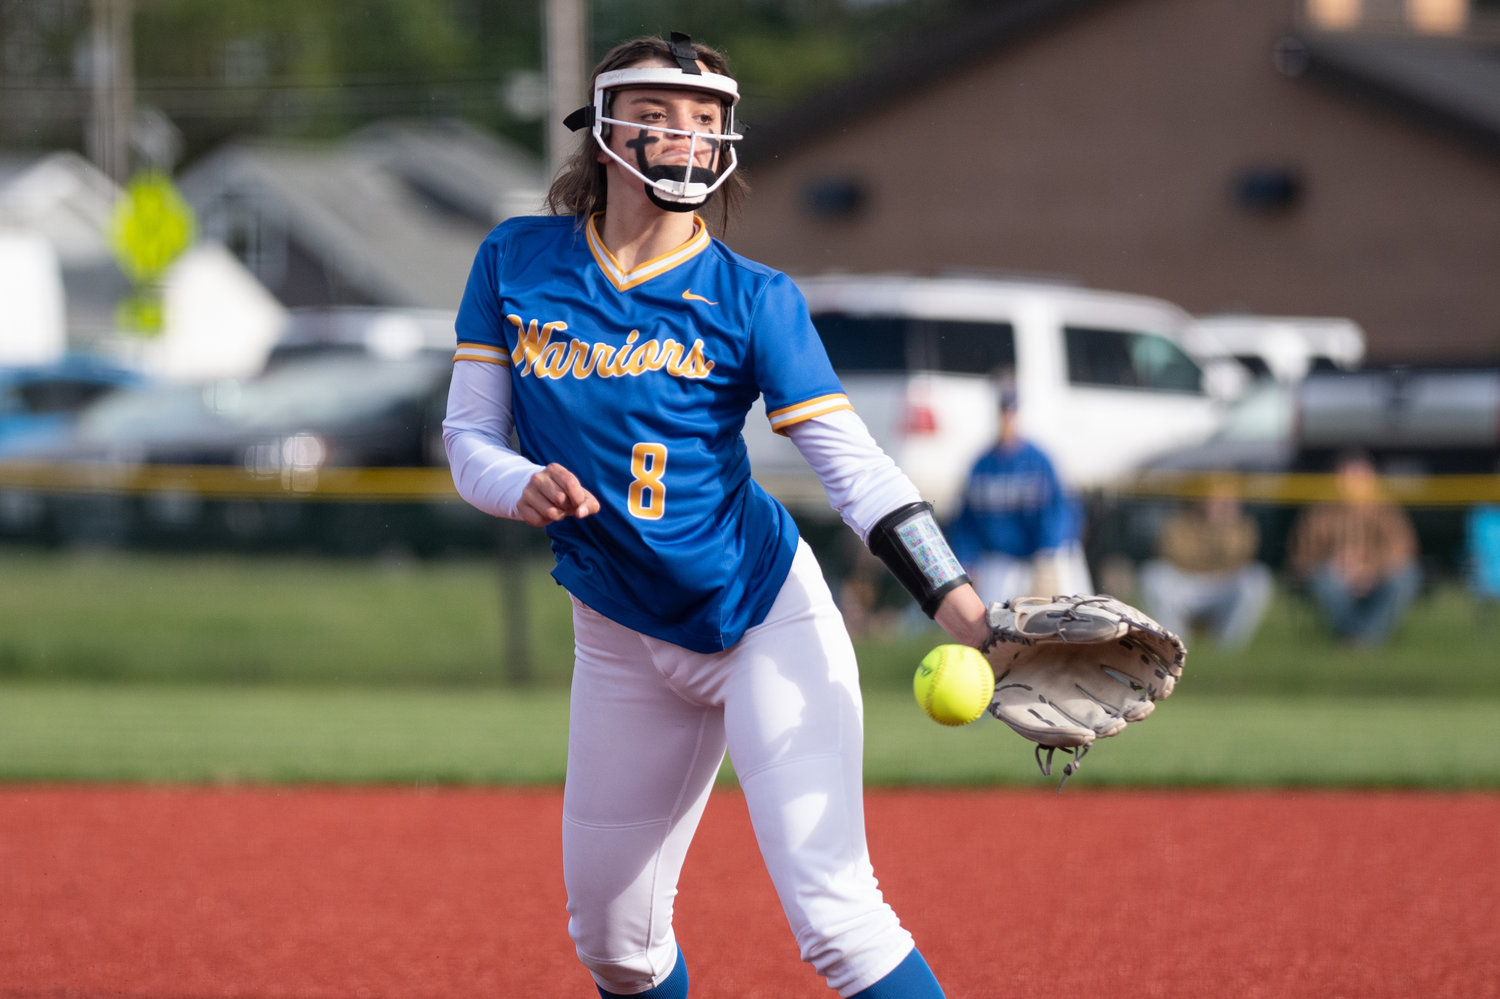 Rochester's Layna Demers sends off a pitch against R.A. Long in the 2A District 4 tournament at Recreation Park May 19.